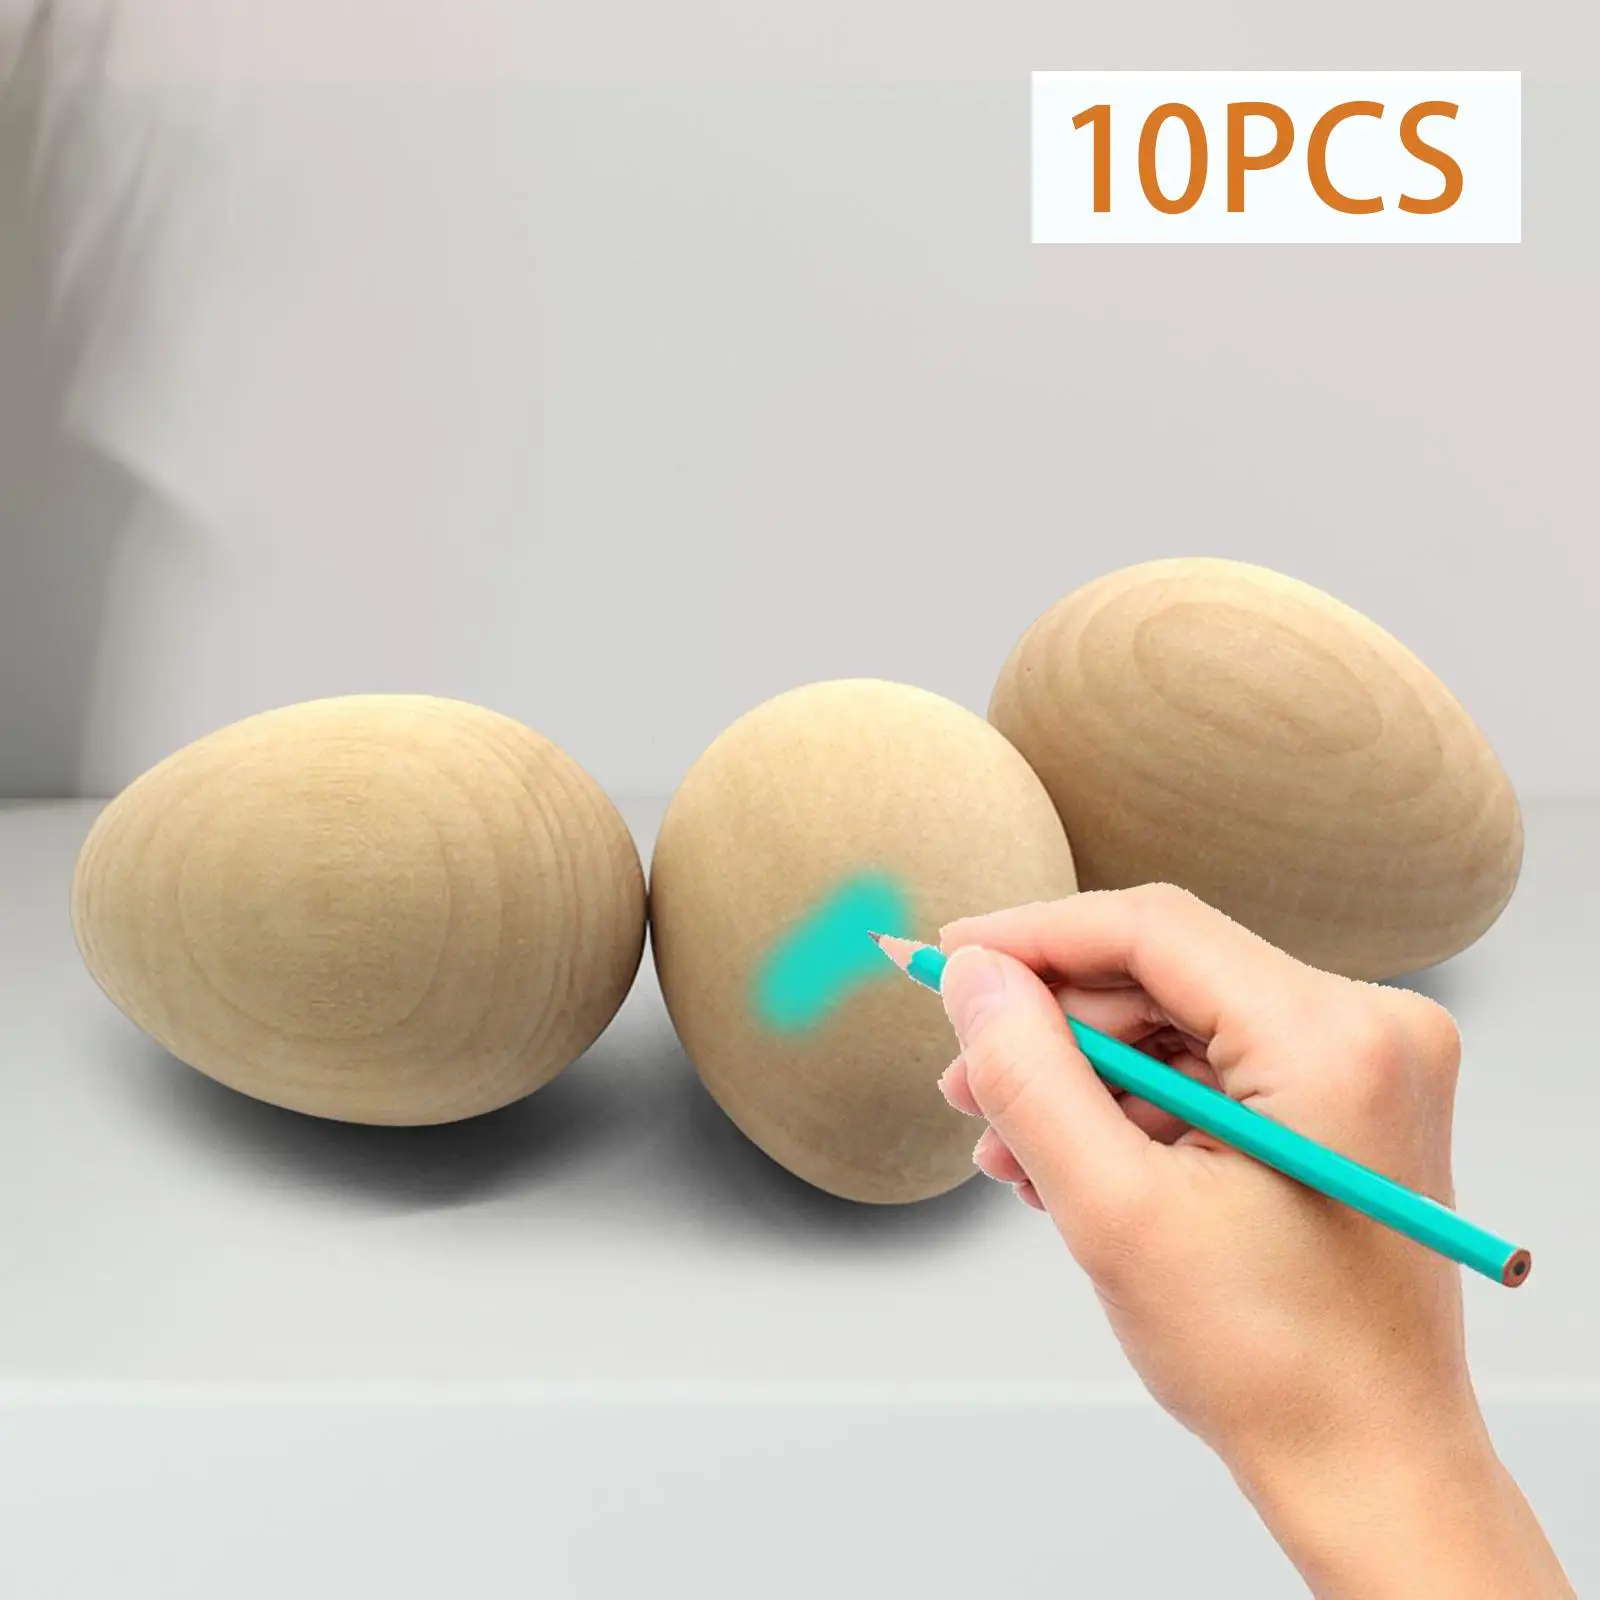 10Pcs Unfinished Wood Eggs with Flat Bottom Wooden Blank Eggs for DIY Easter images - 4